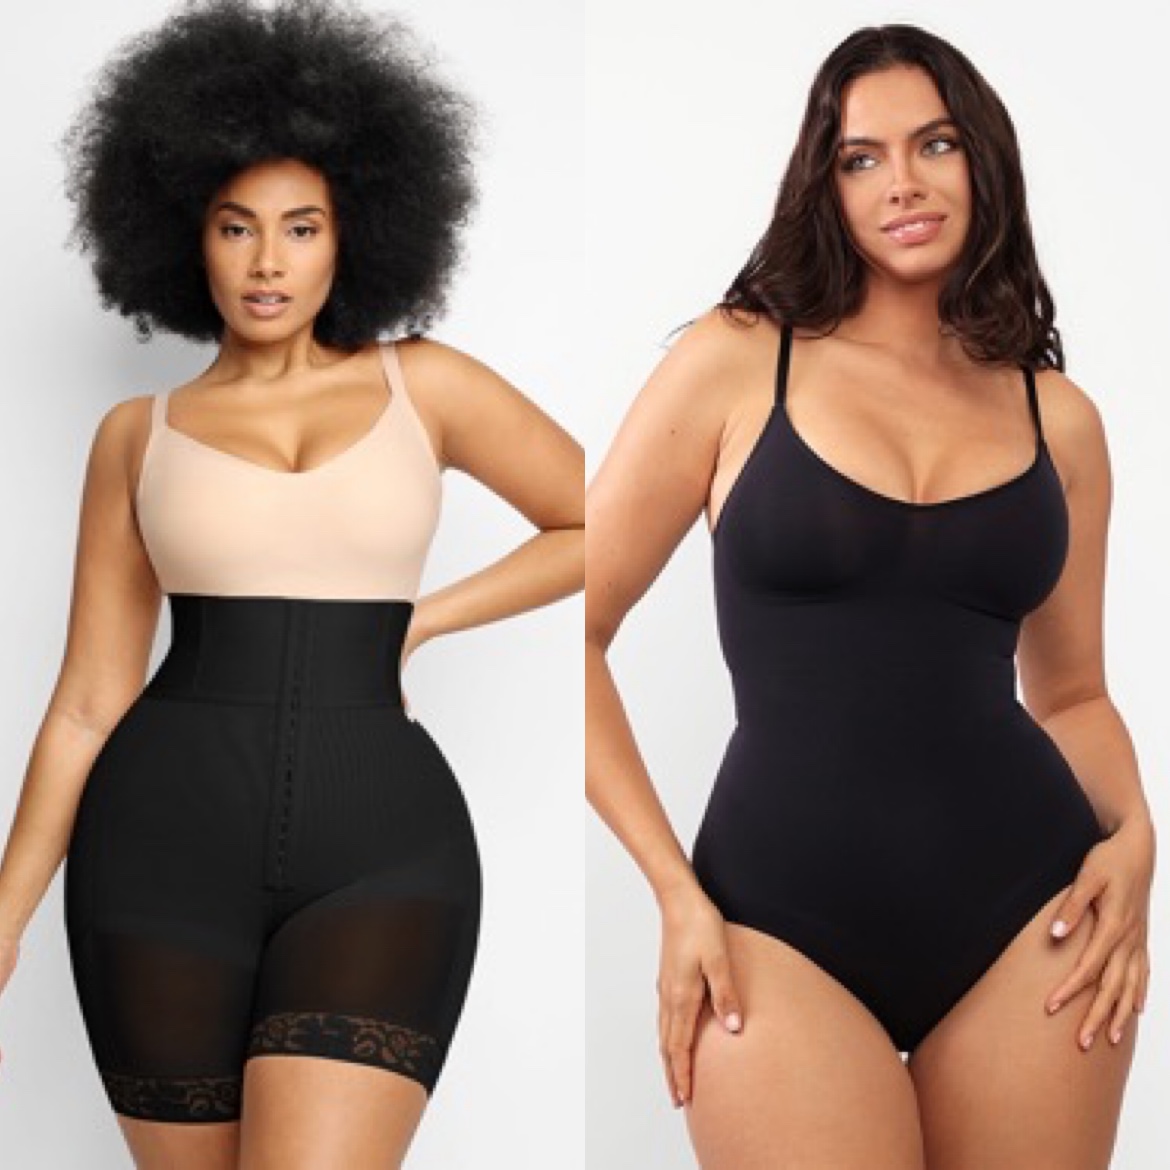 How to Find Shapewear That Works and Fits?